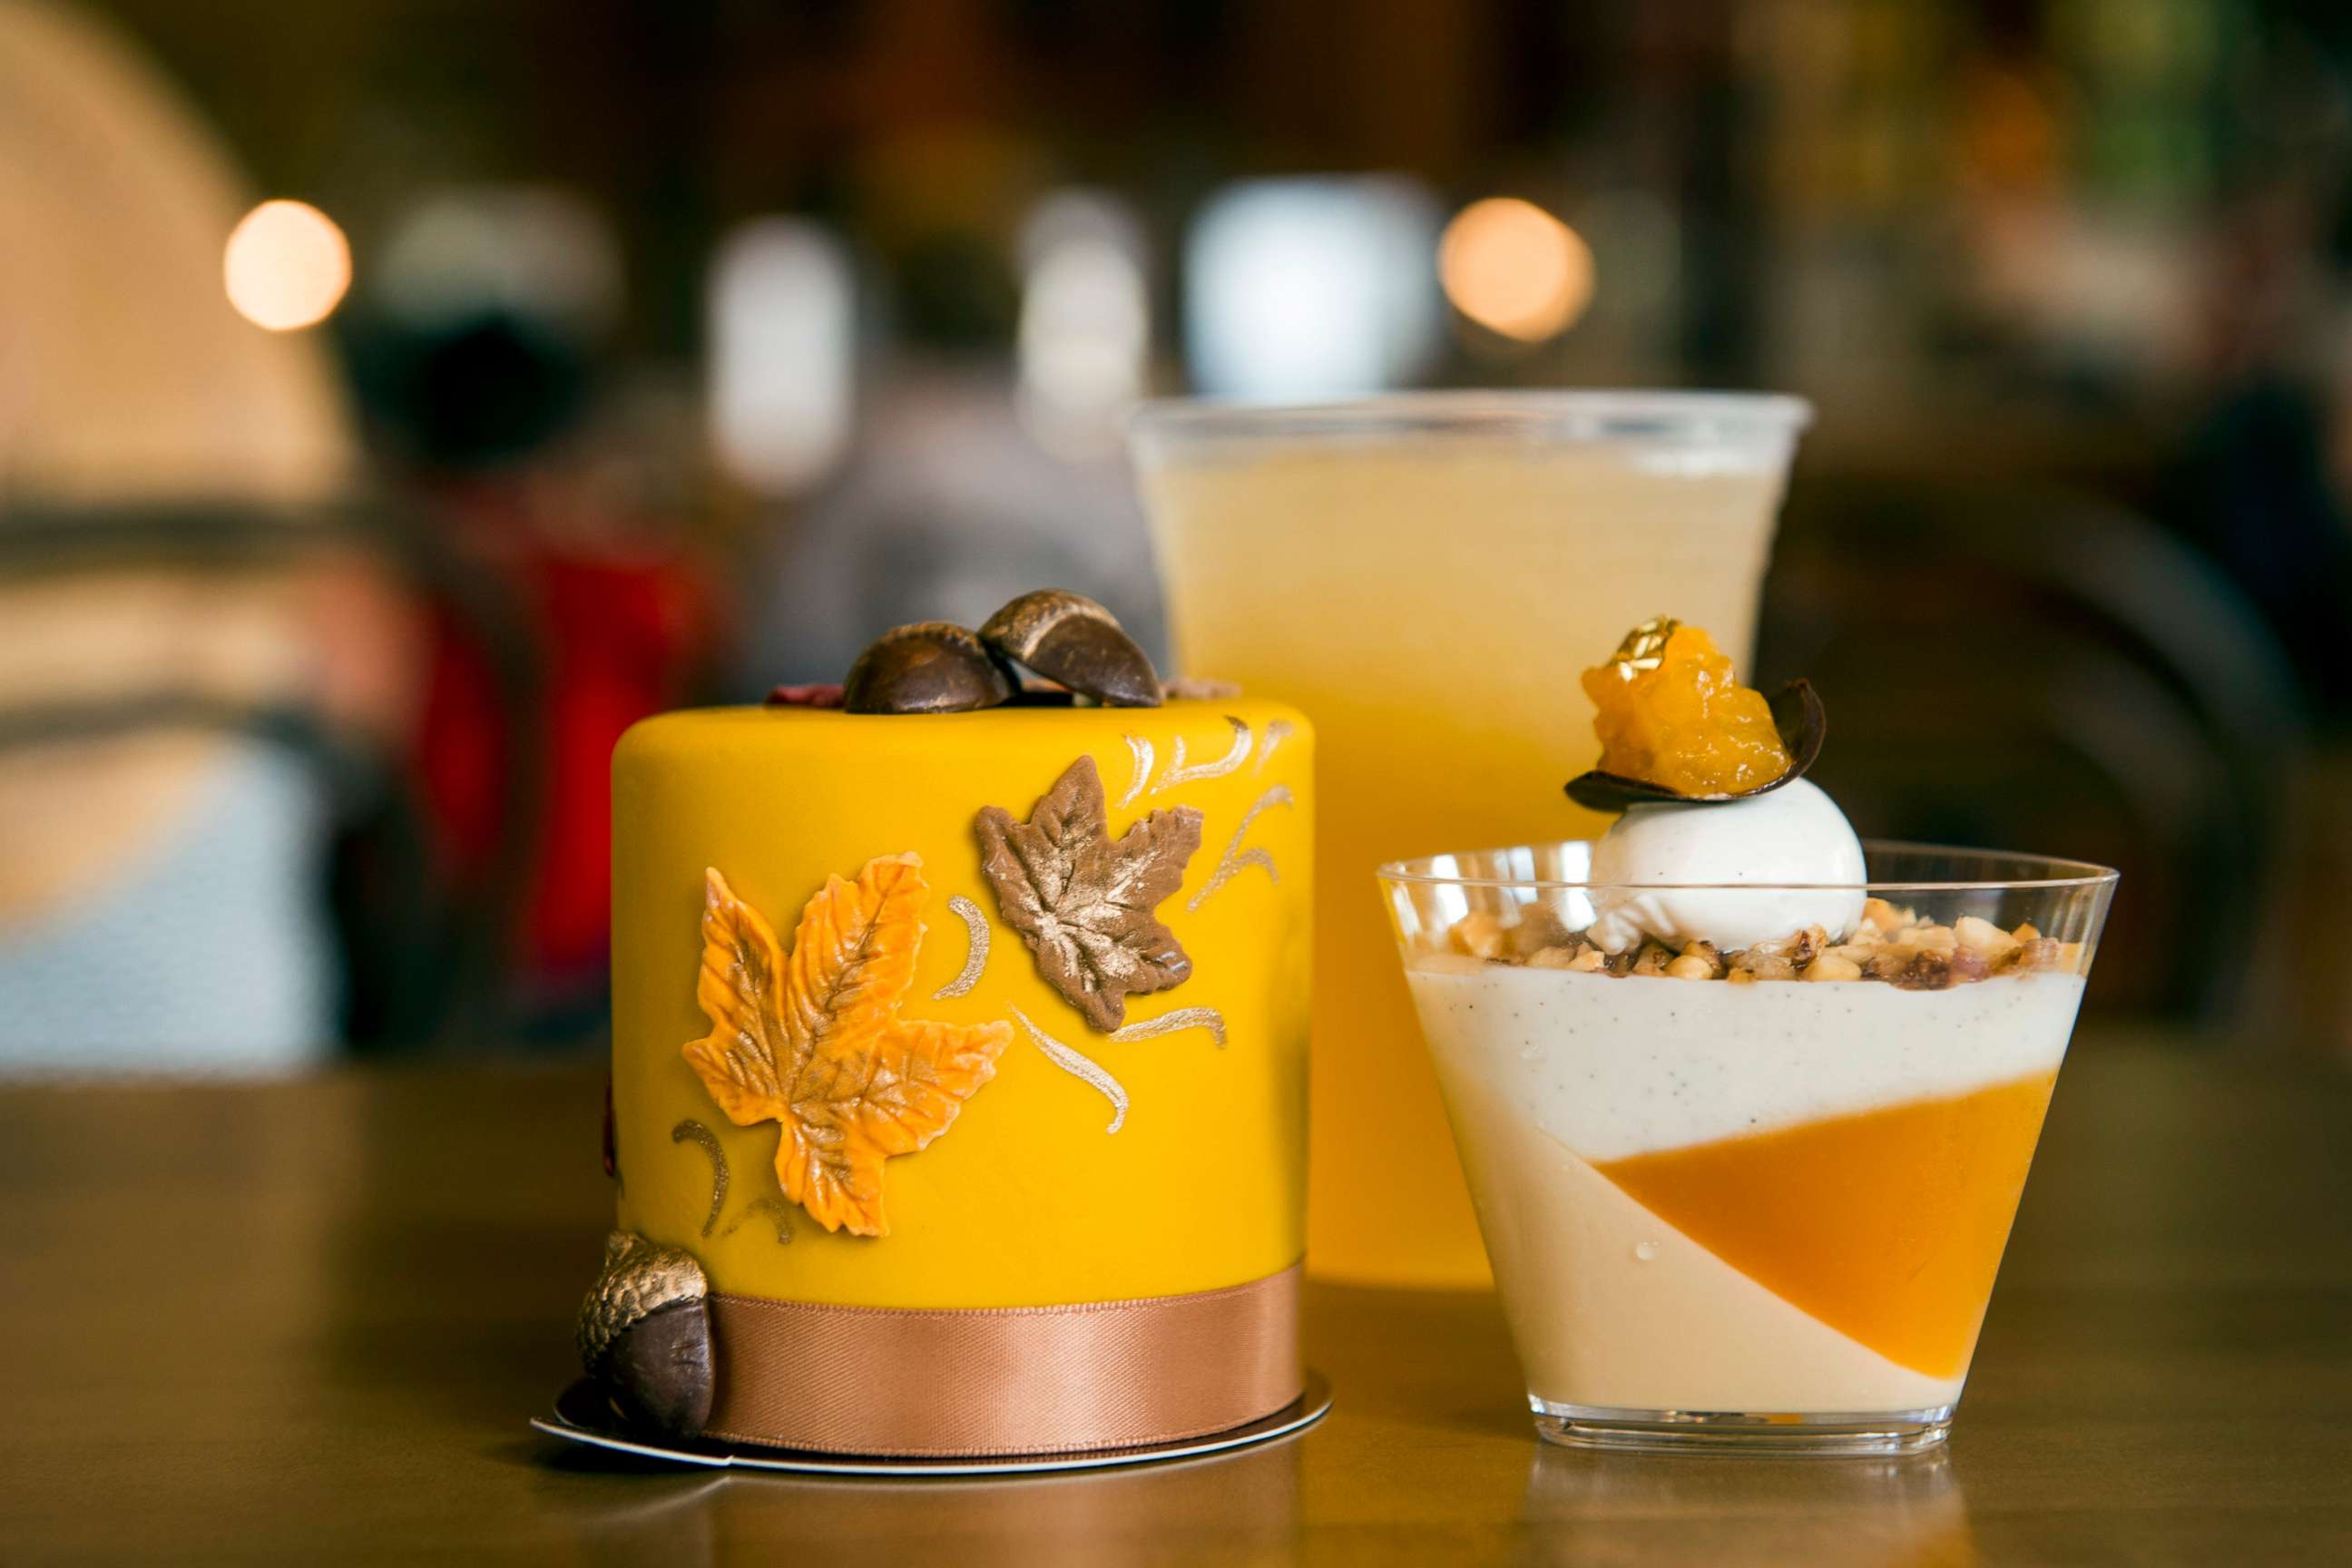 PHOTO: The Caramel Apricot Cobbler, The Fall Harvest Petit Cake and Apple Cider Riesling Wine Slushie are available at Amorette's Patisserie.